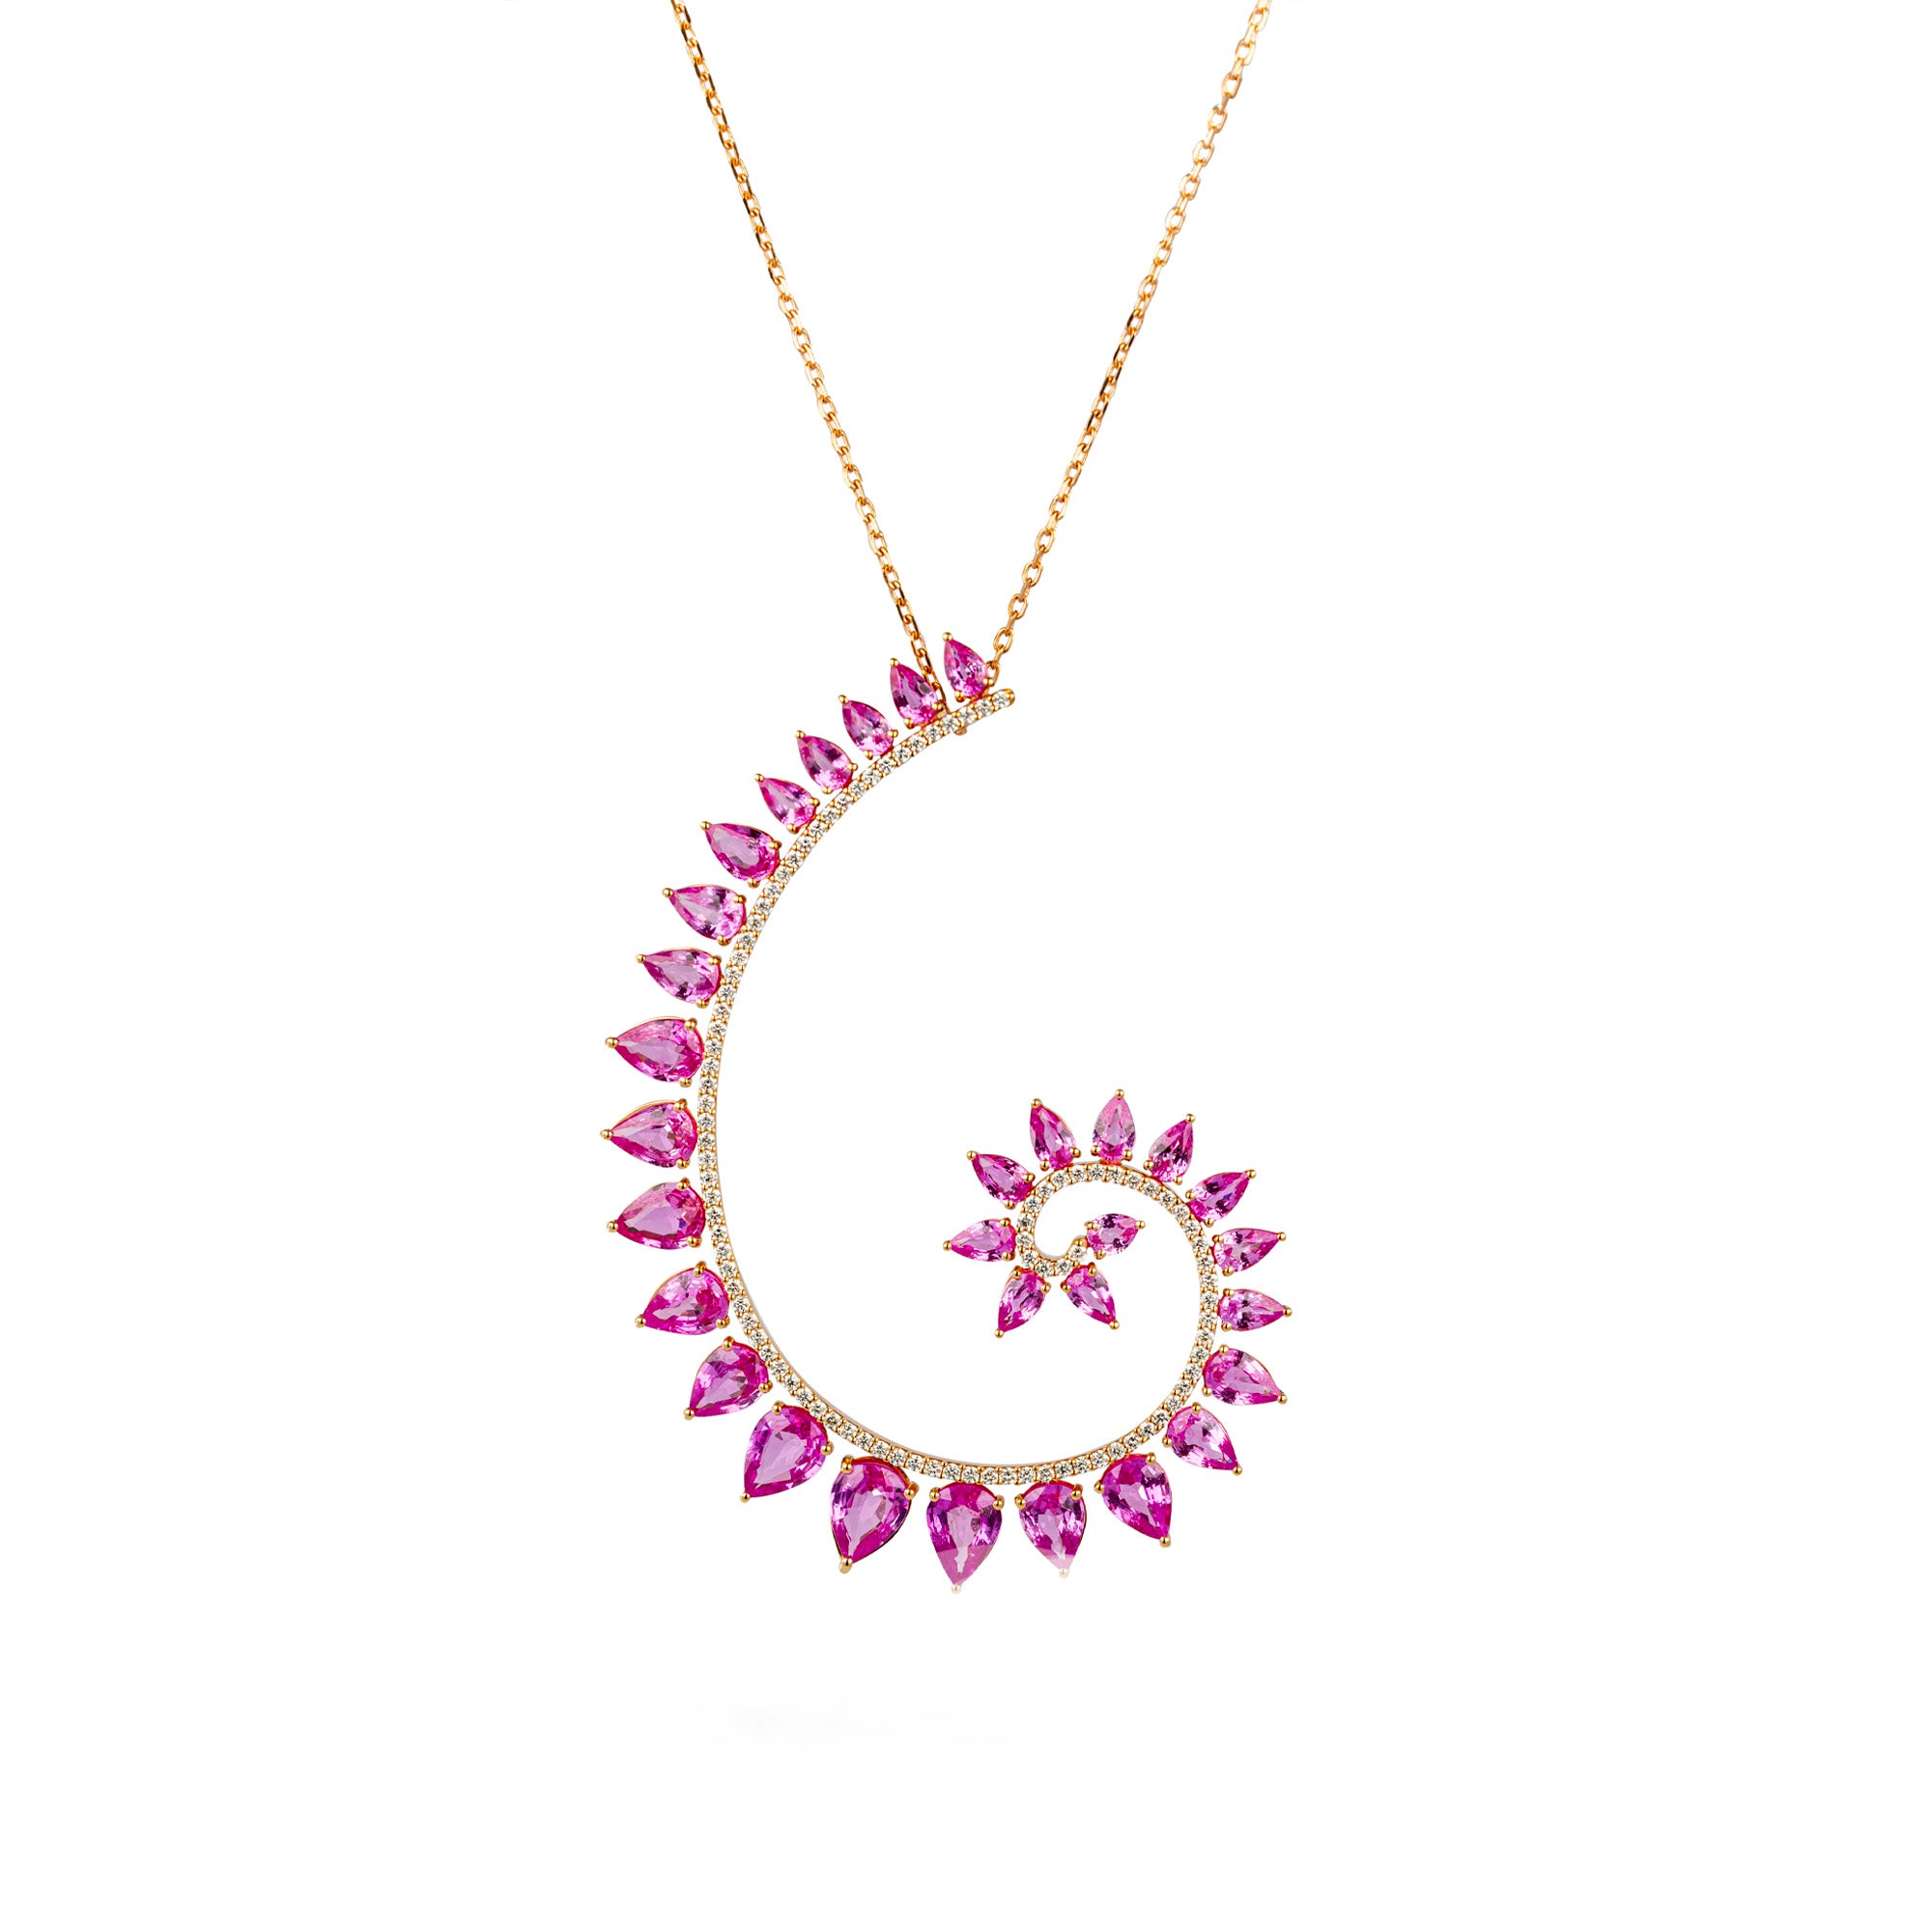 Genesi Rose Gold Necklace With Pink Sapphires And Diamonds